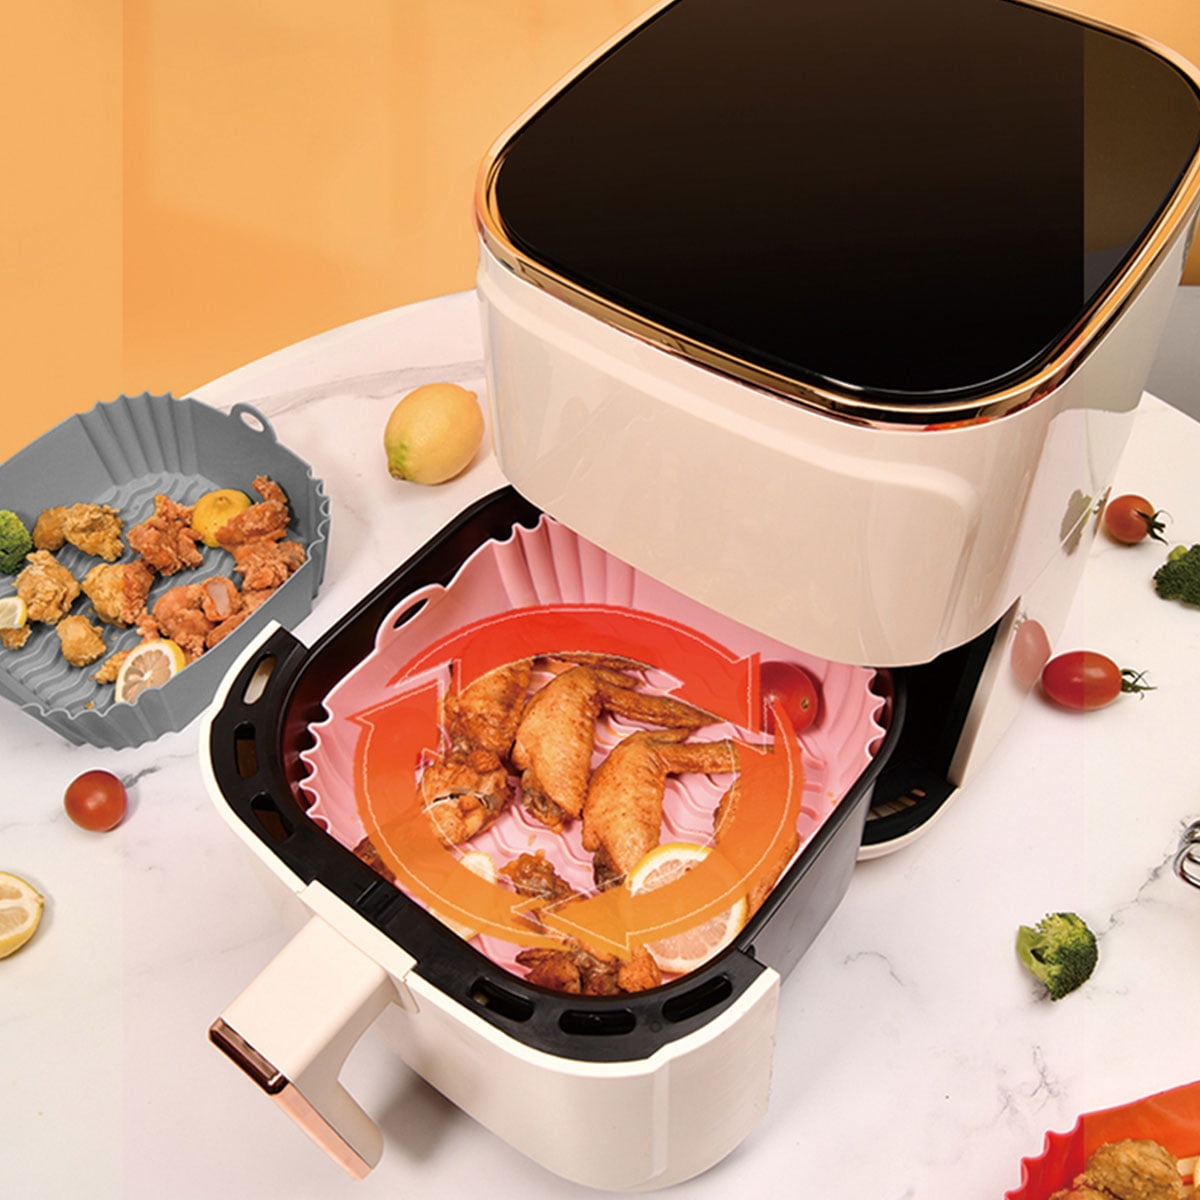 Dropship Air Fryer Silicone Pot With Handle Reusable Liner Heat